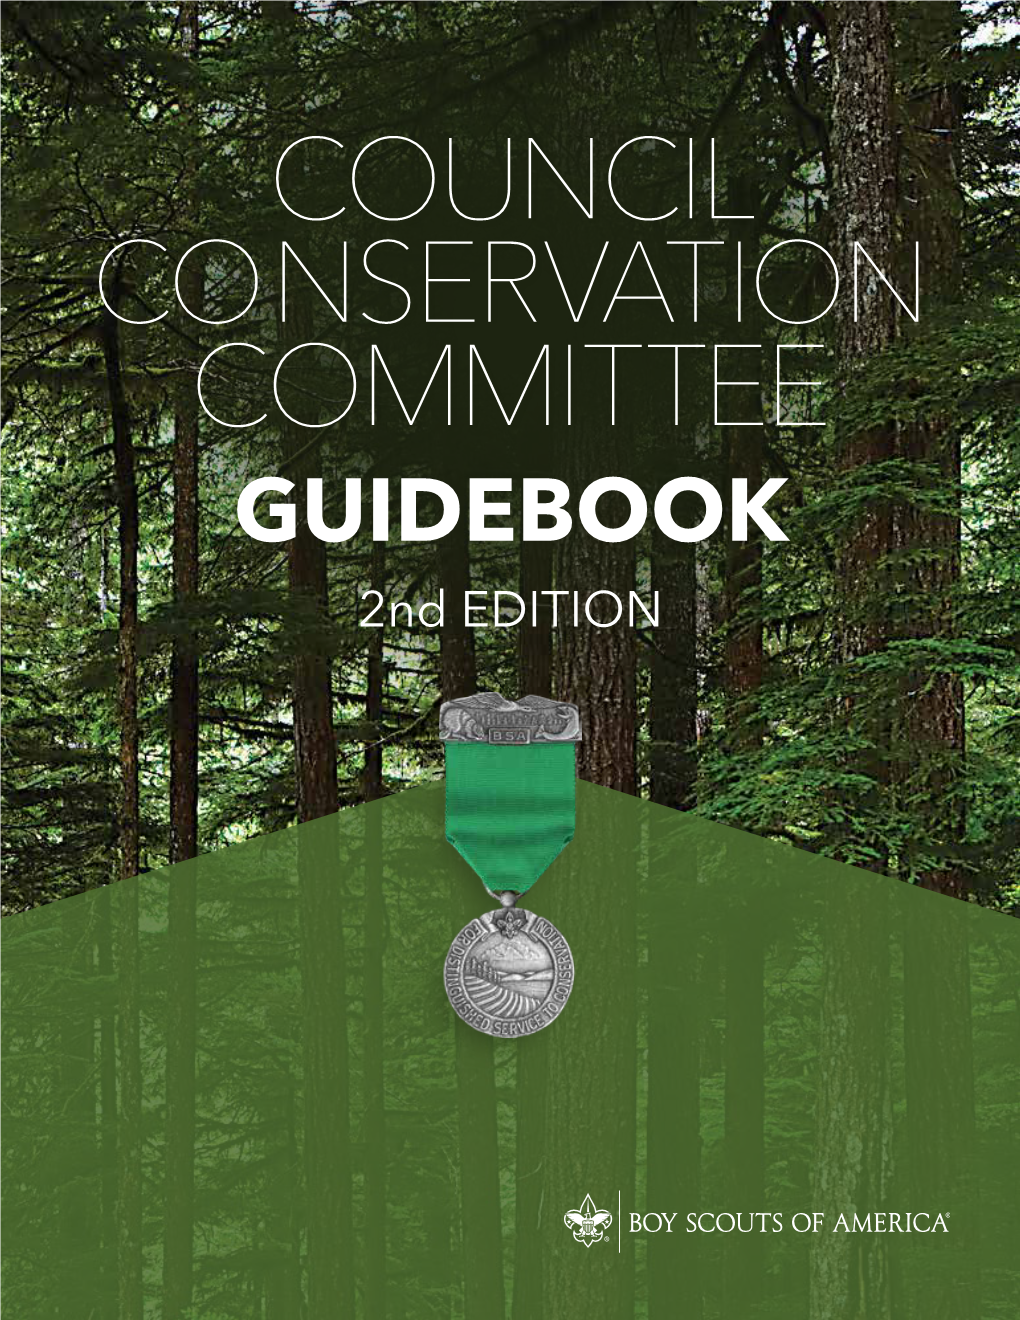 GUIDEBOOK 2Nd EDITION COUNCIL CONSERVATION COMMITTEE GUIDEBOOK